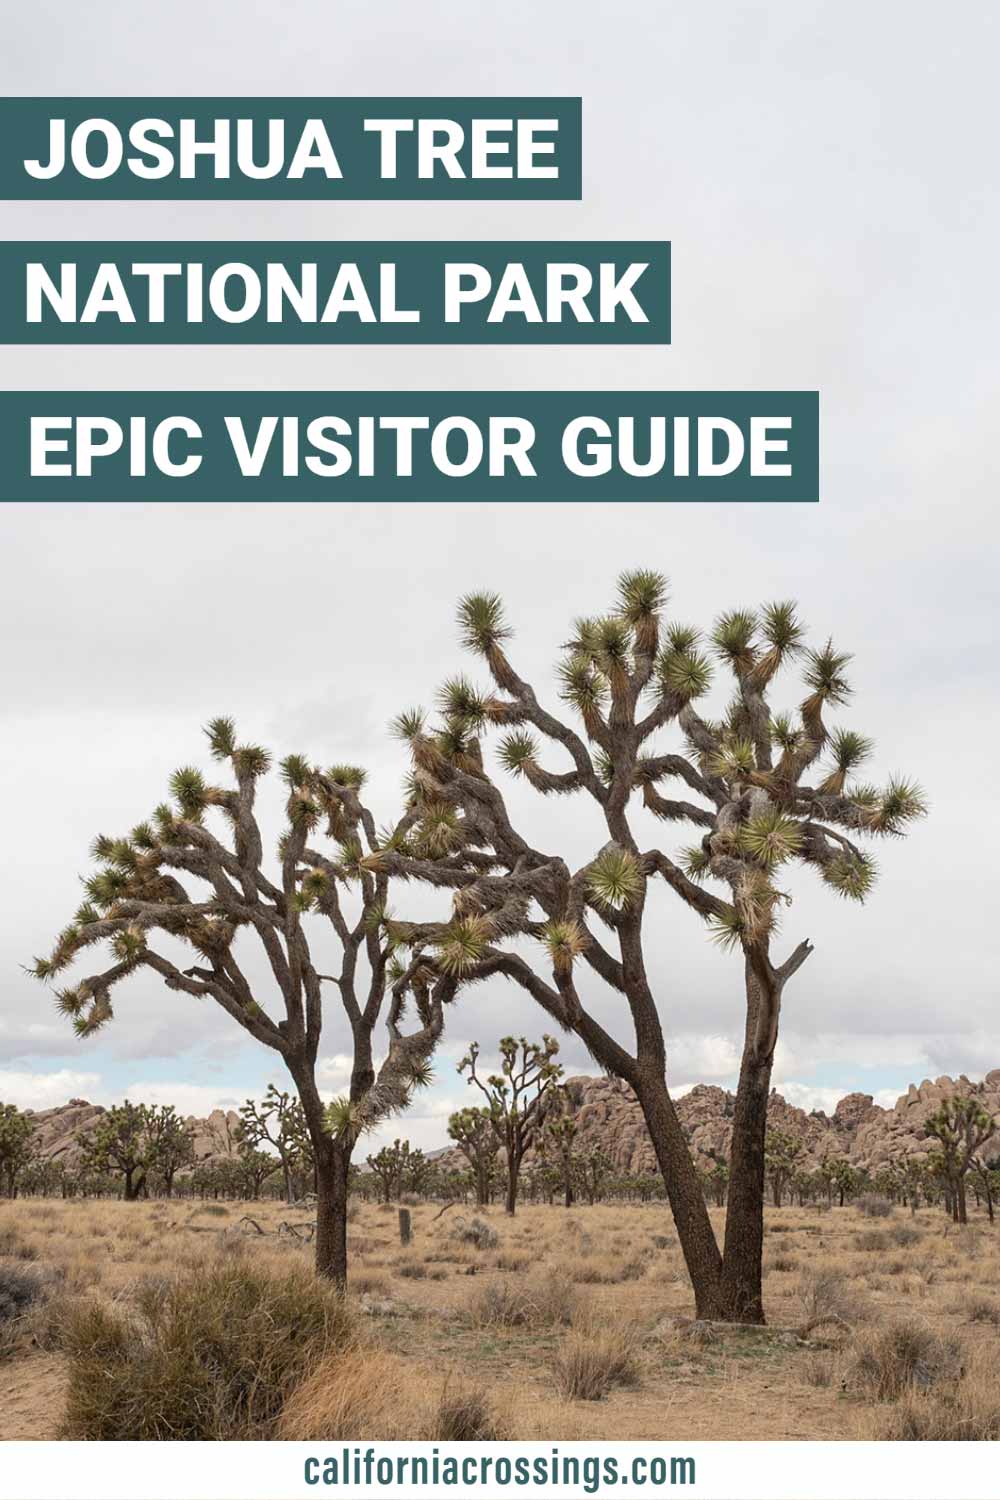 Joshua Tree national park epic visitor guide.